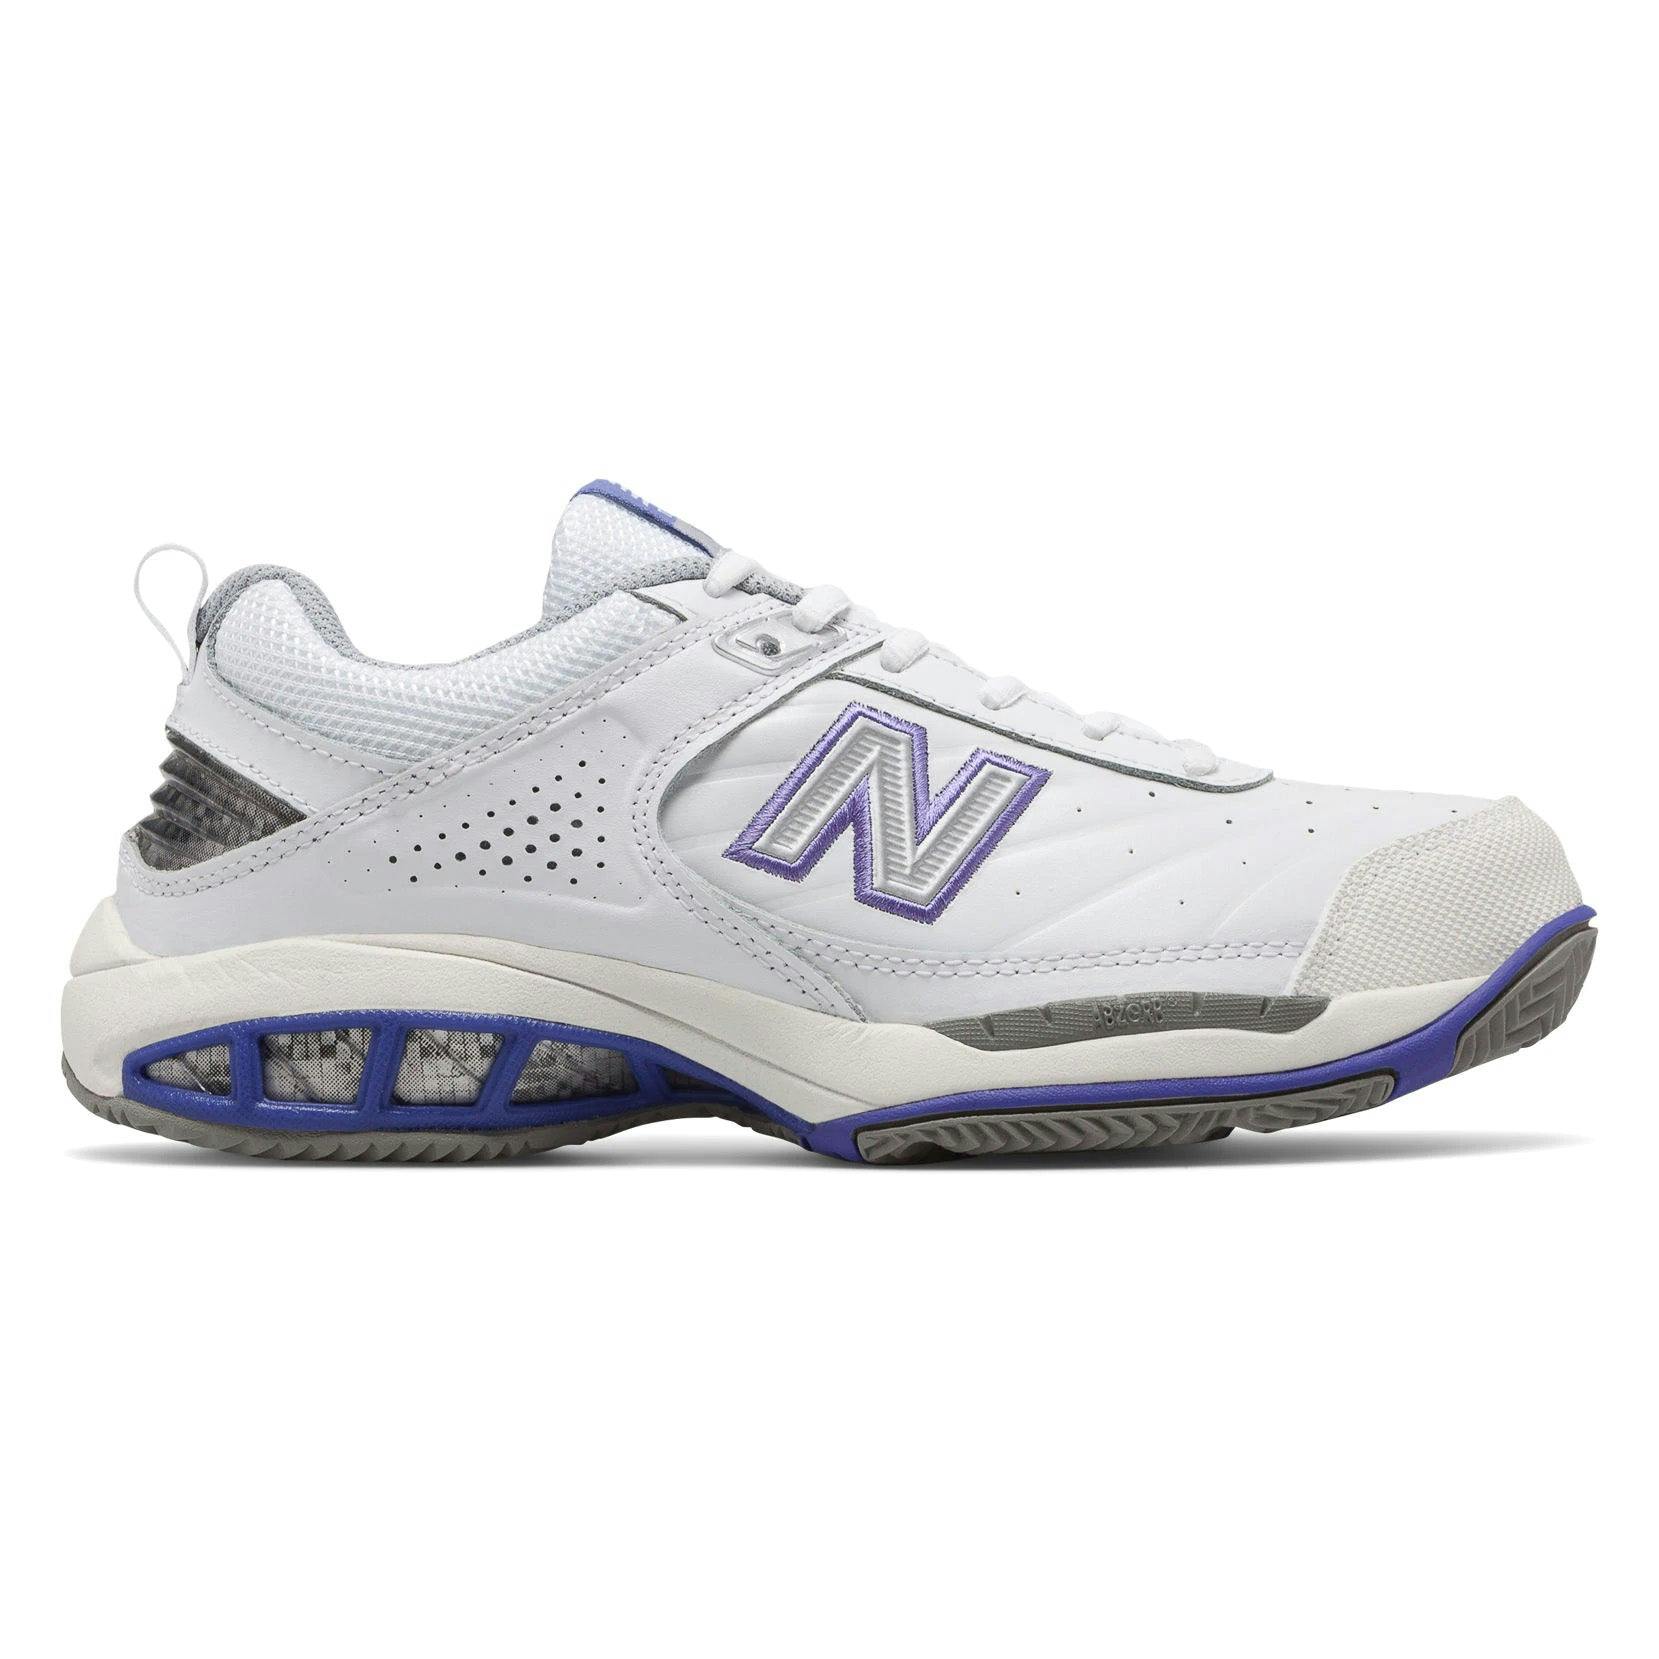 New Balance 806 White Womens Tennis Shoes - D Wide / 10.5